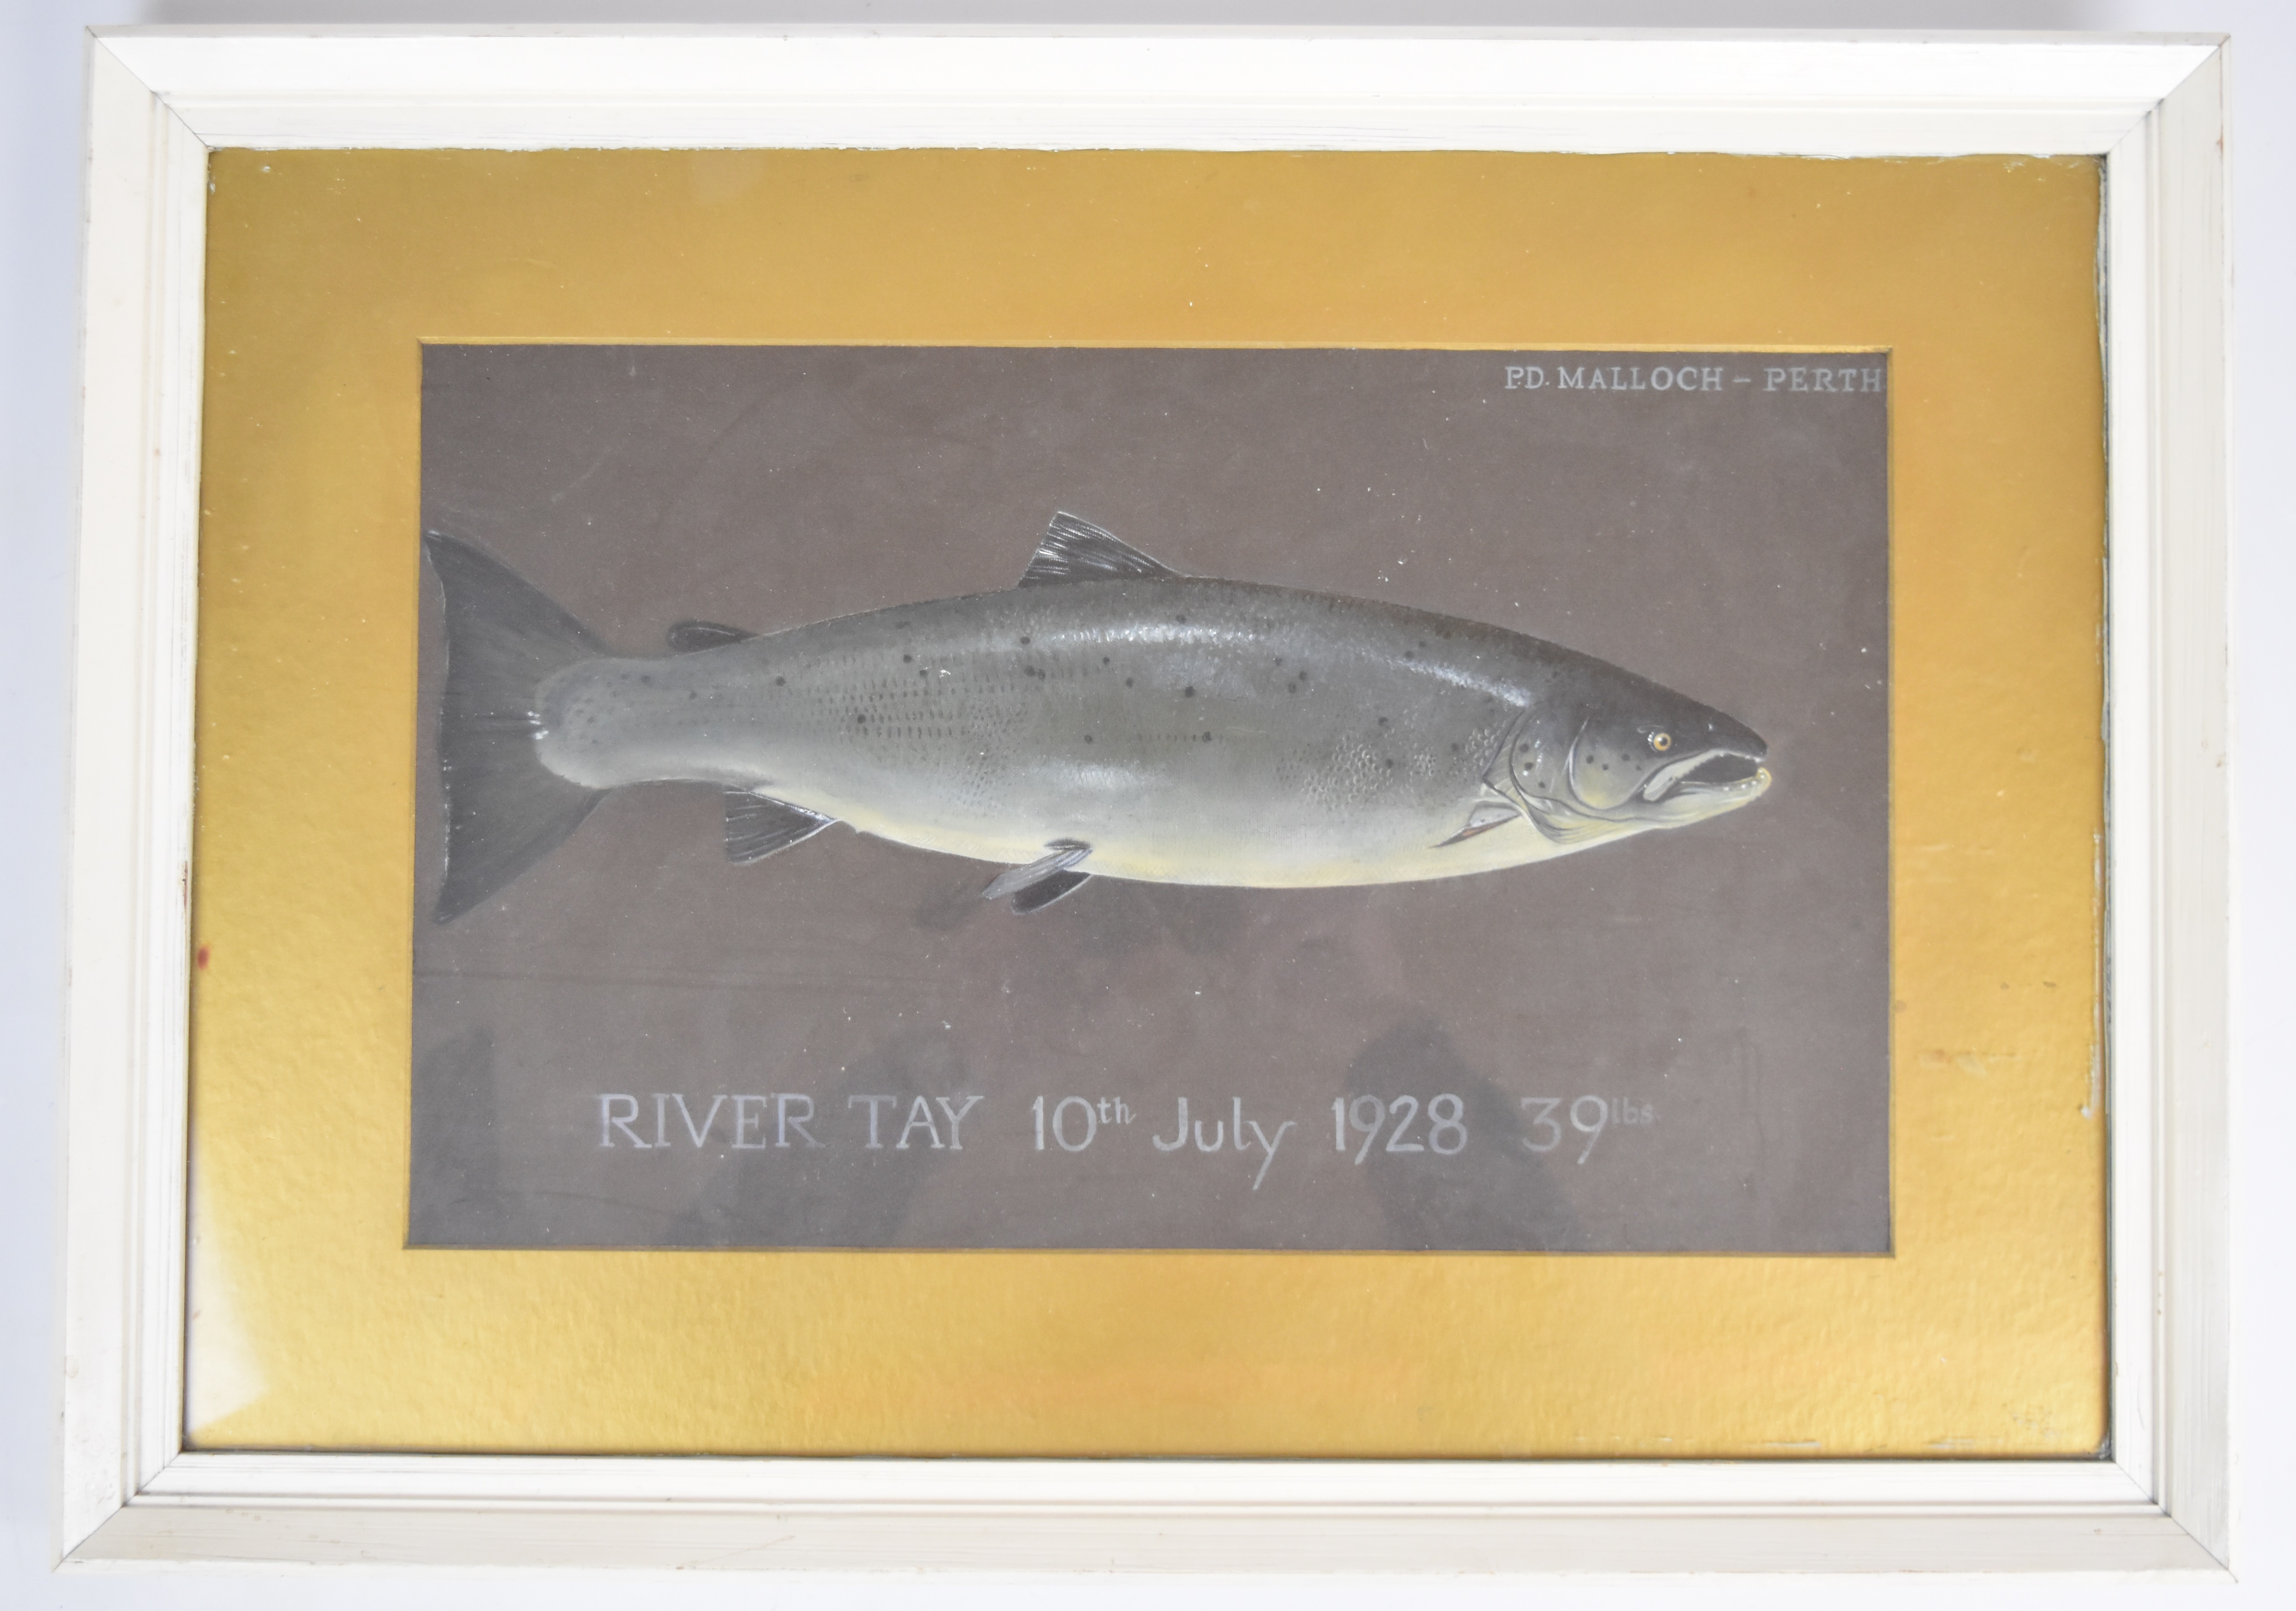 P.D Malloch Perth watercolour study of a trout or similar fish, titled 'River Tay 10th July 1928 - Image 2 of 3